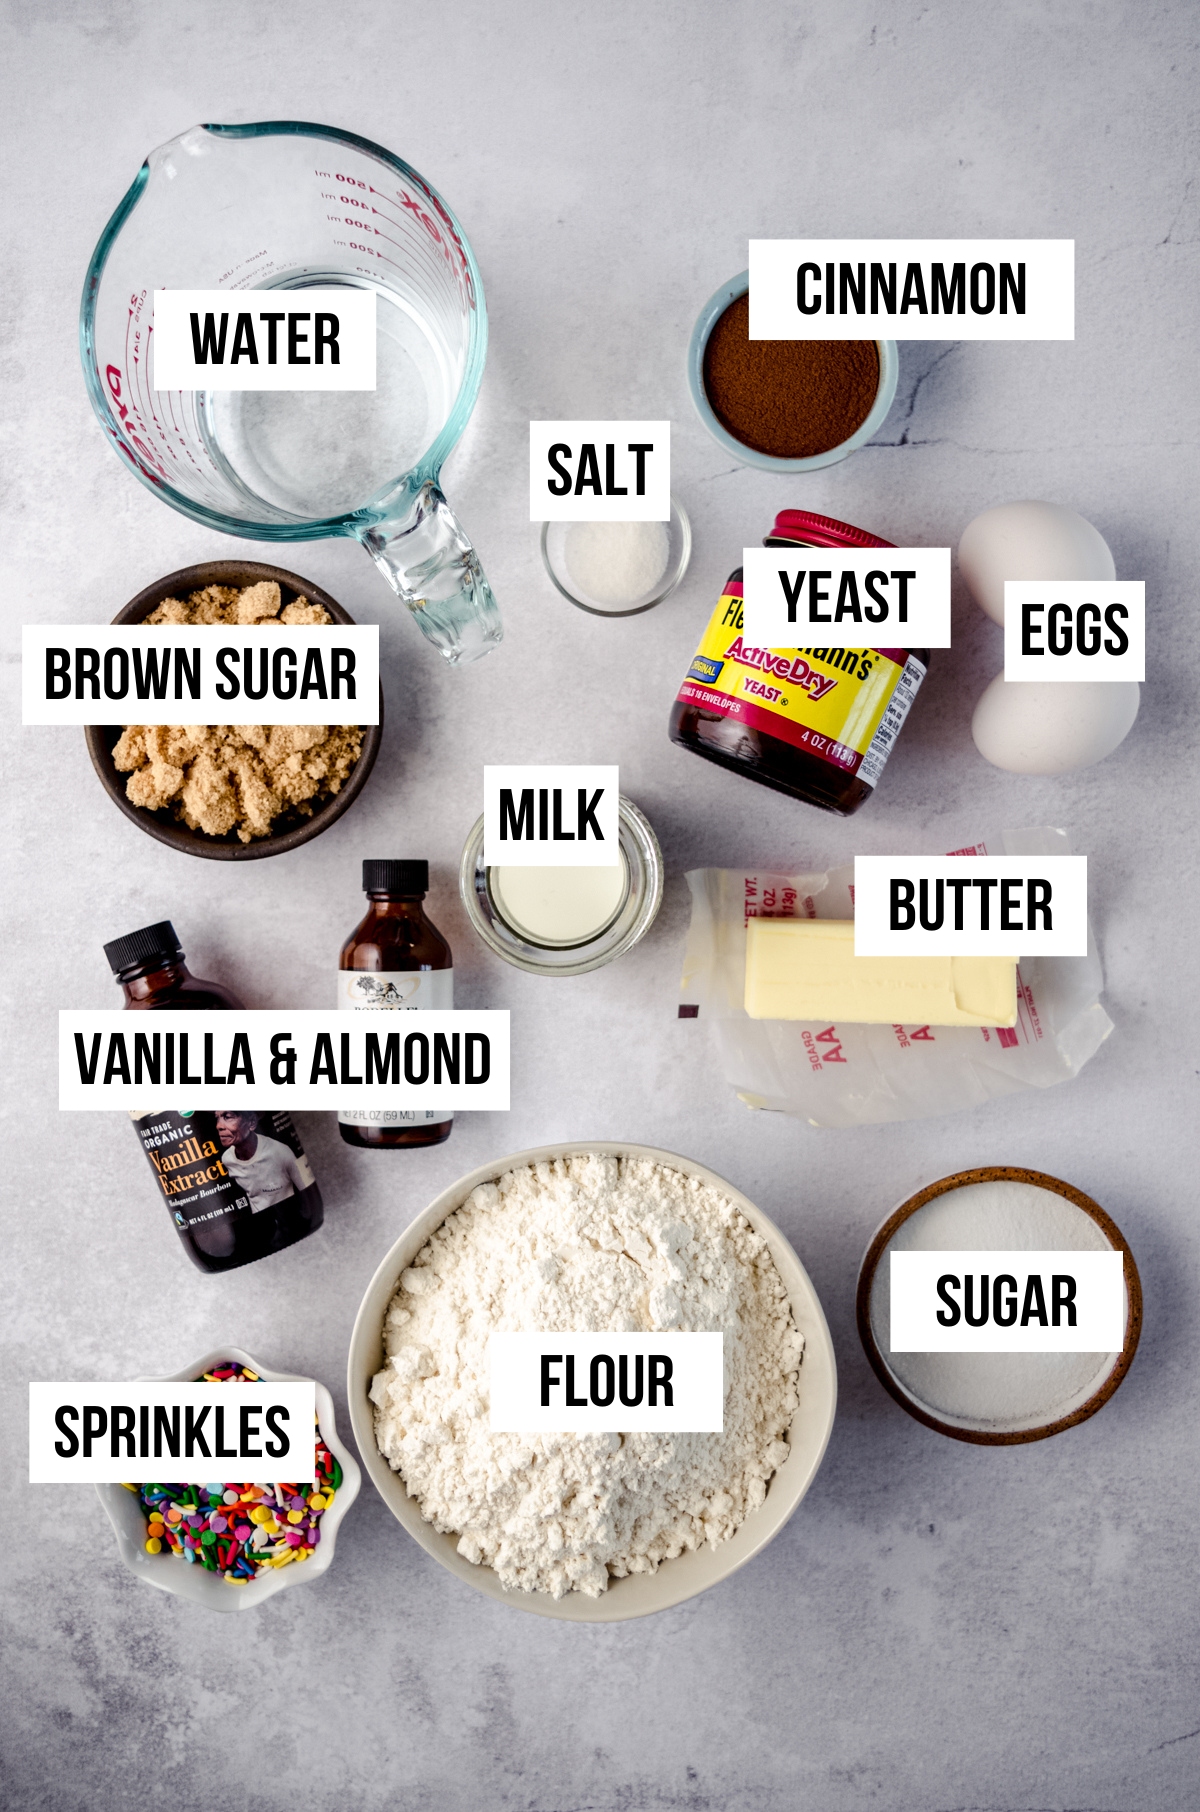 Aerial photo of ingredients for funfetti cinnamon rolls with text overlay.